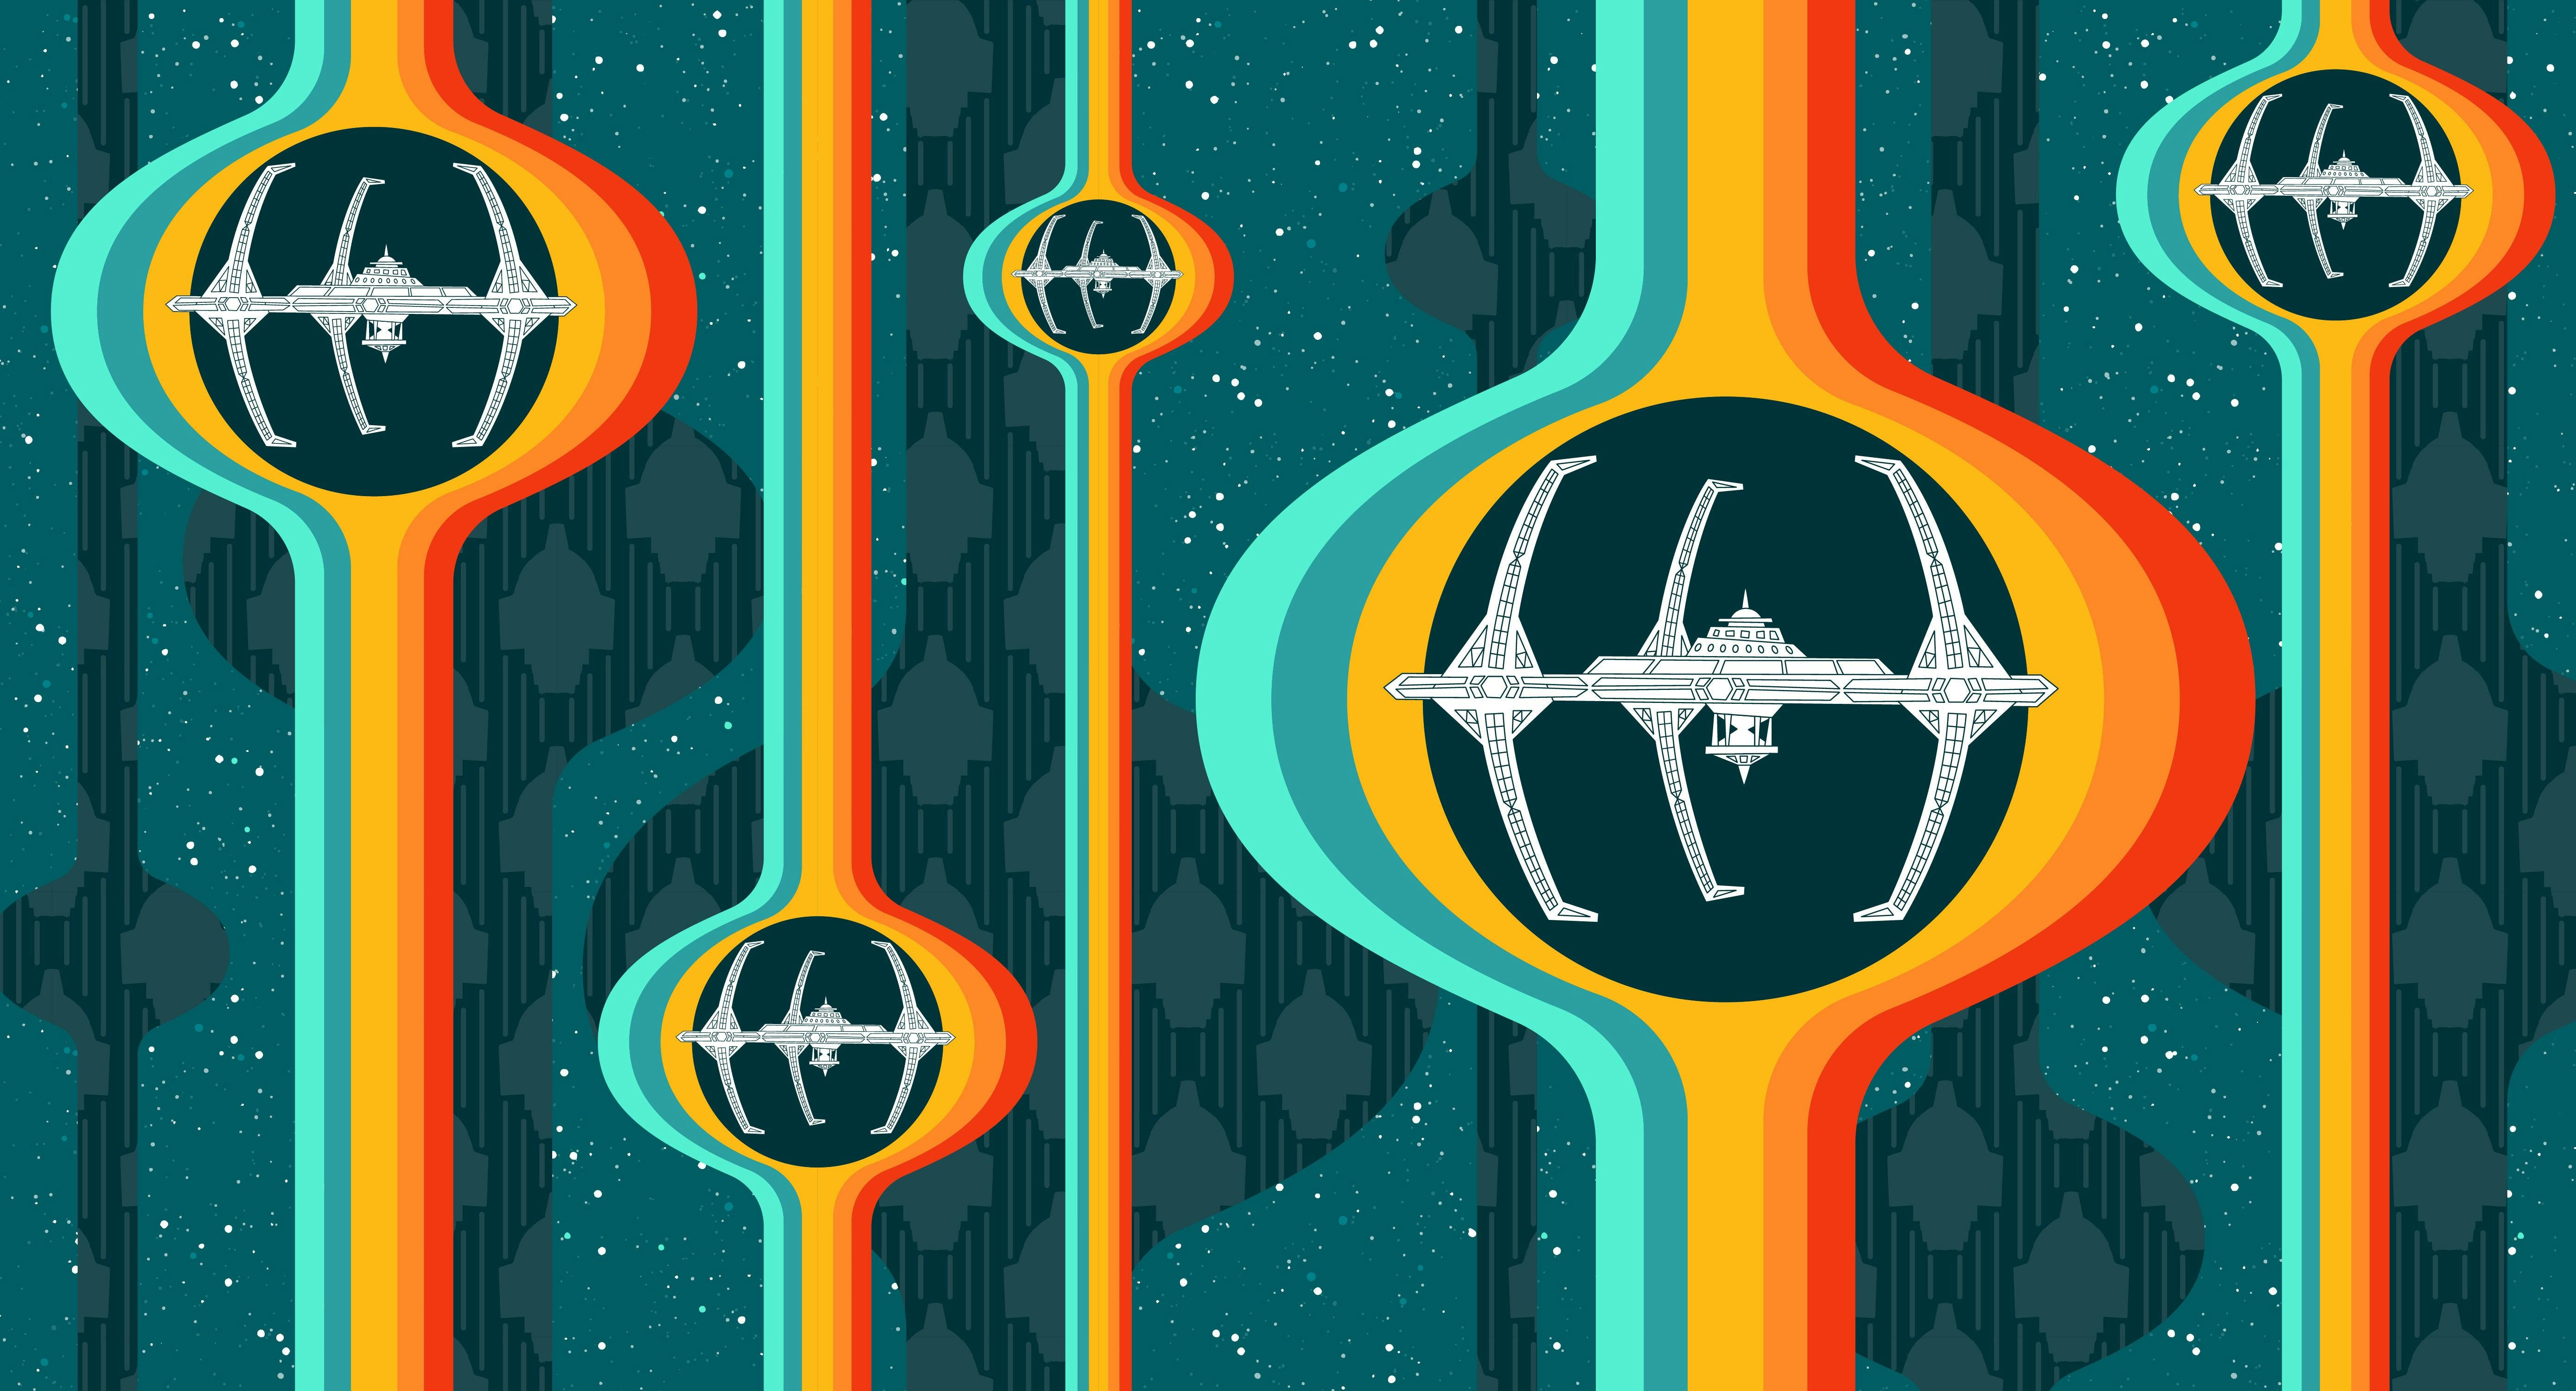 Illustrated banner of Deep Space 9 (formerly Terok Nor) space station